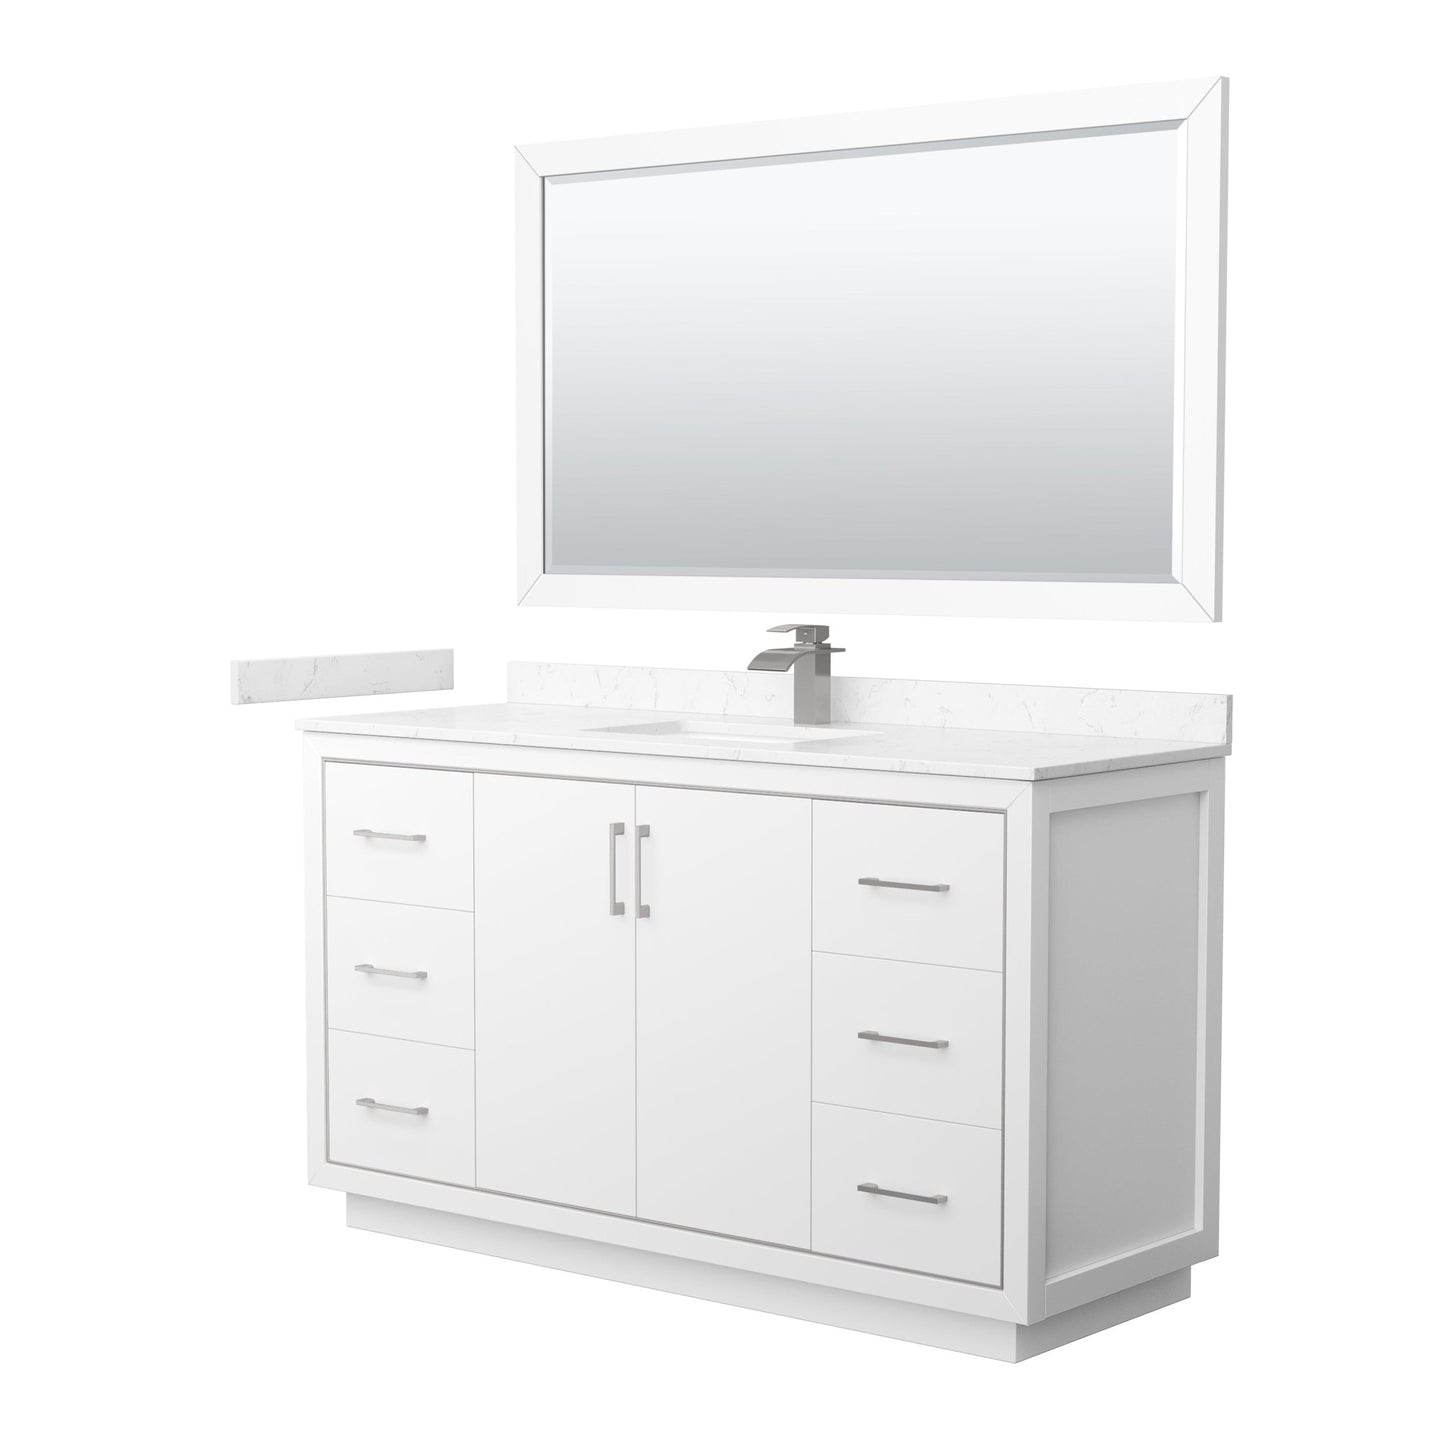 Wyndham Collection Icon 60" Single Bathroom Vanity in White, Carrara Cultured Marble Countertop, Undermount Square Sink, Brushed Nickel Trim, 58" Mirror